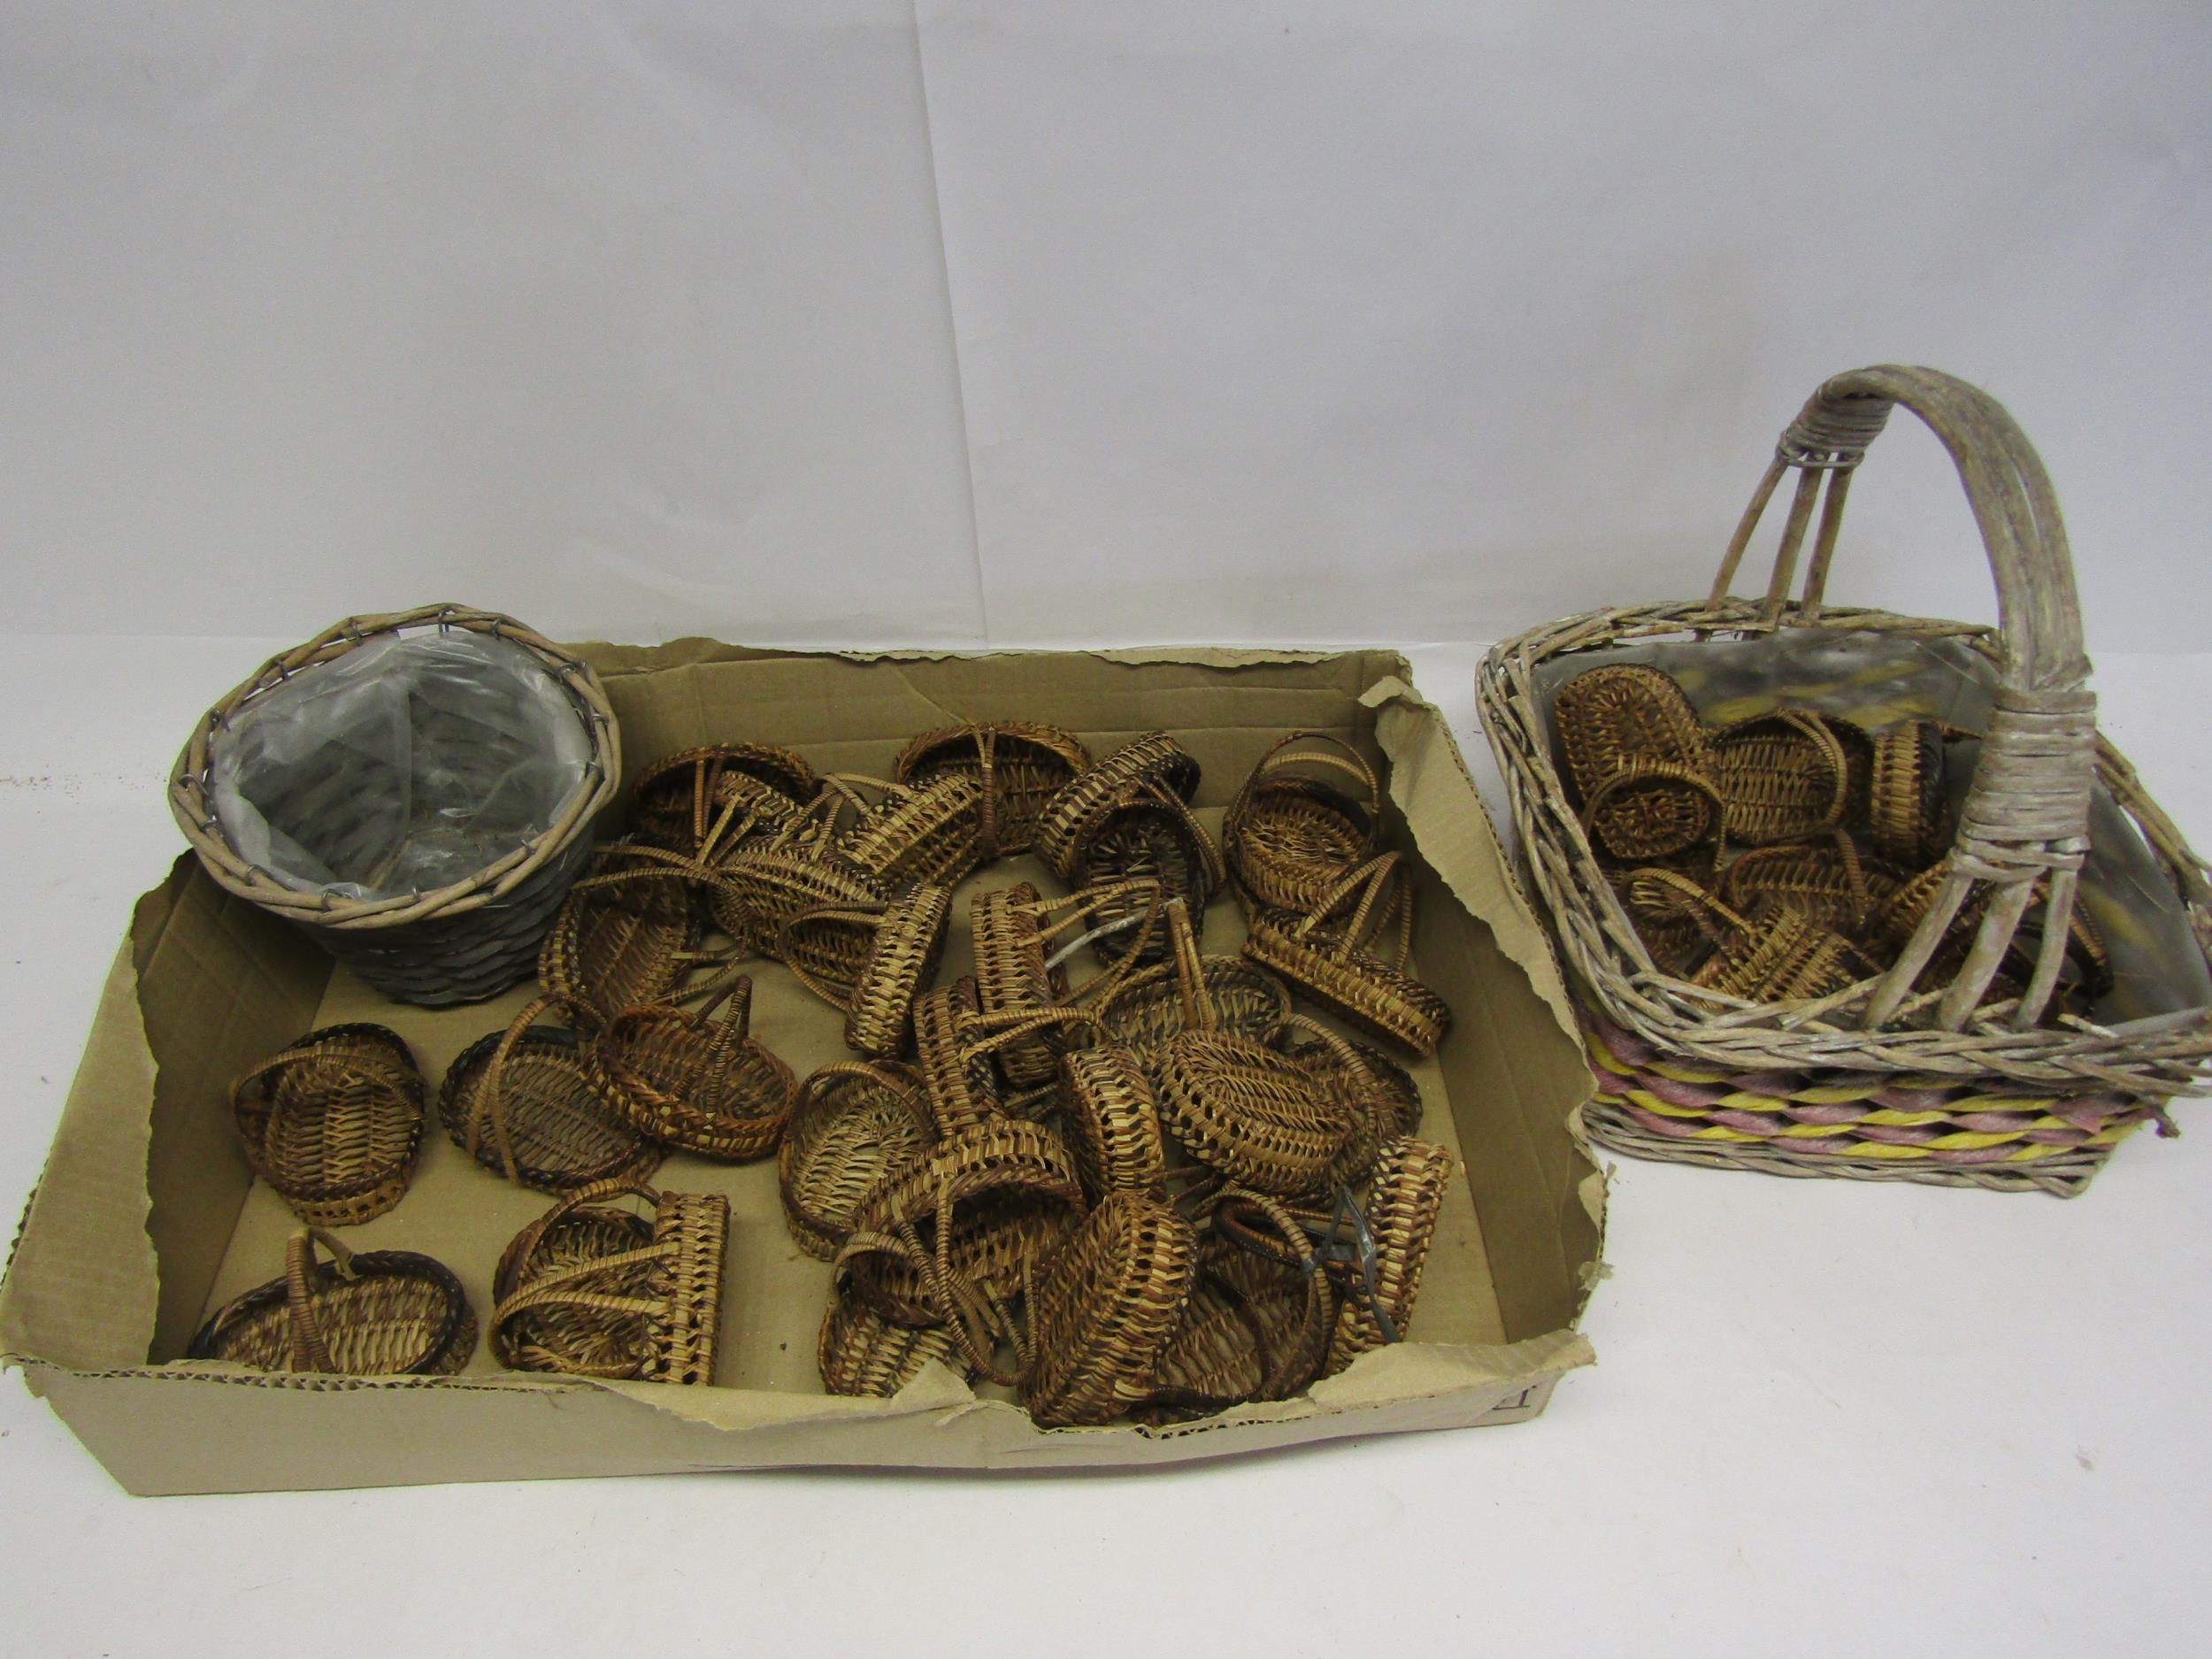 A collection of miniature wicker baskets